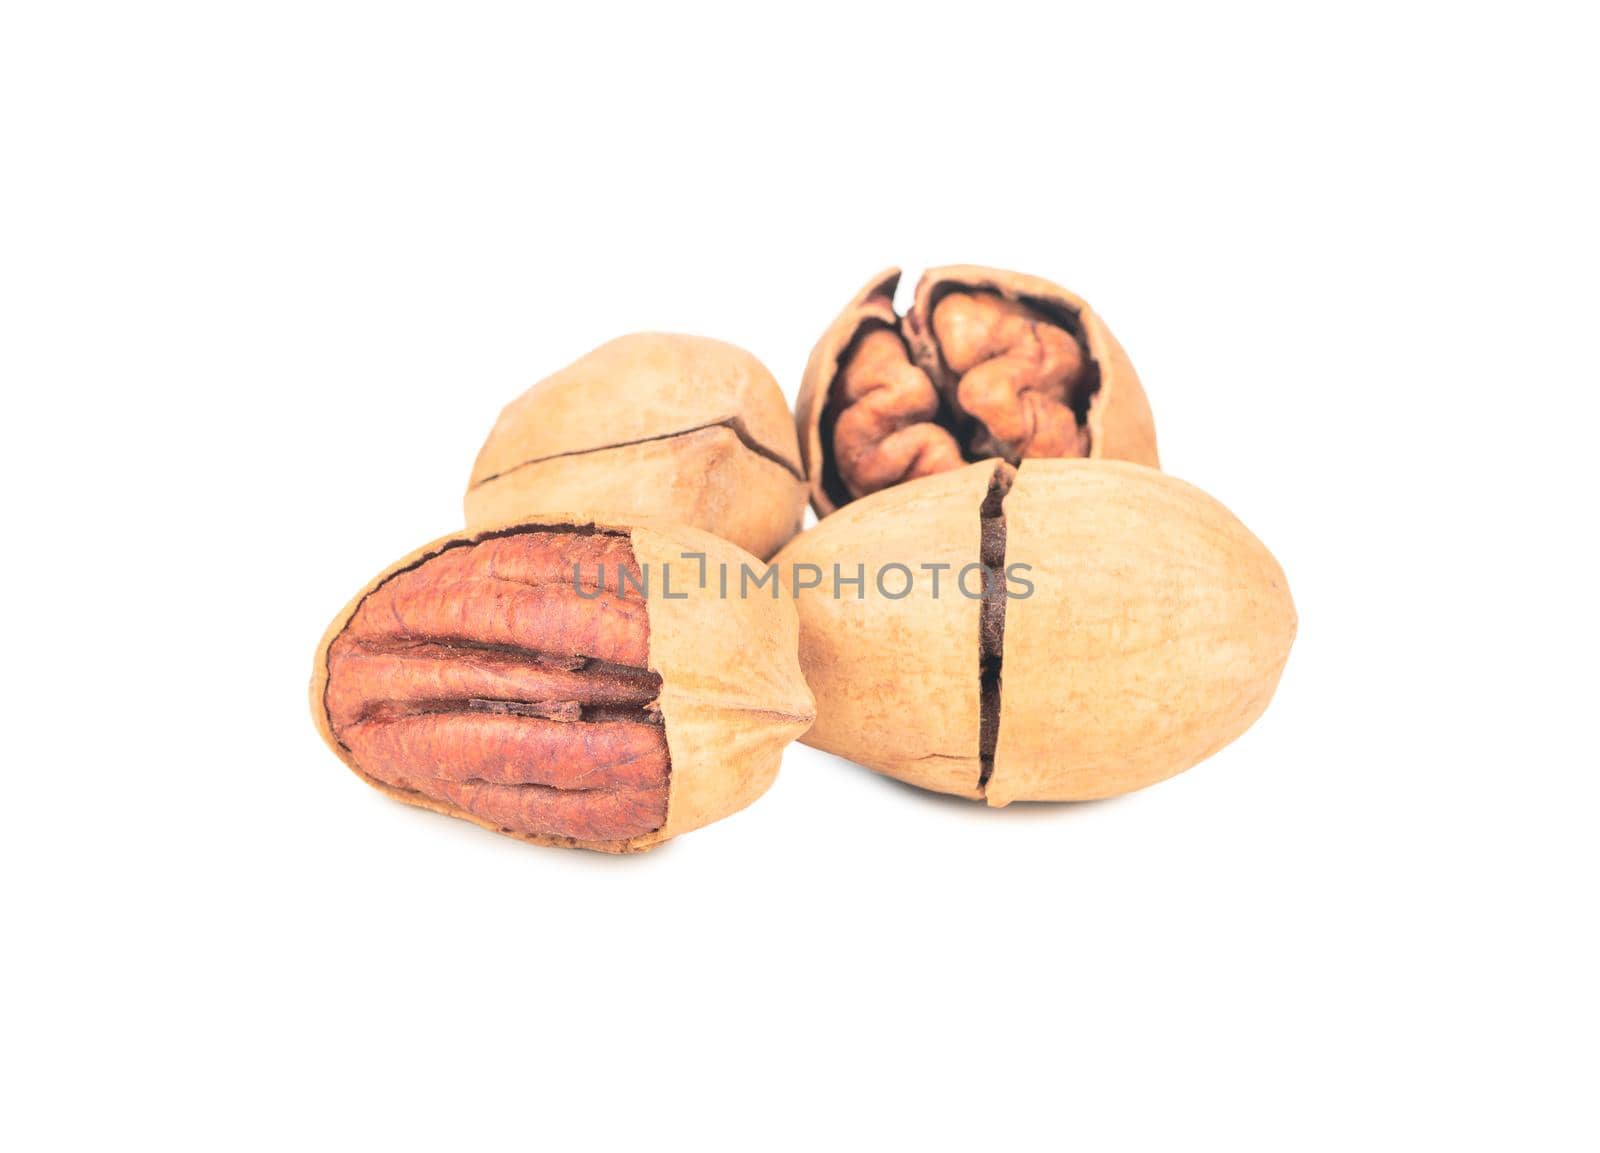 Several inshell pecans by andregric